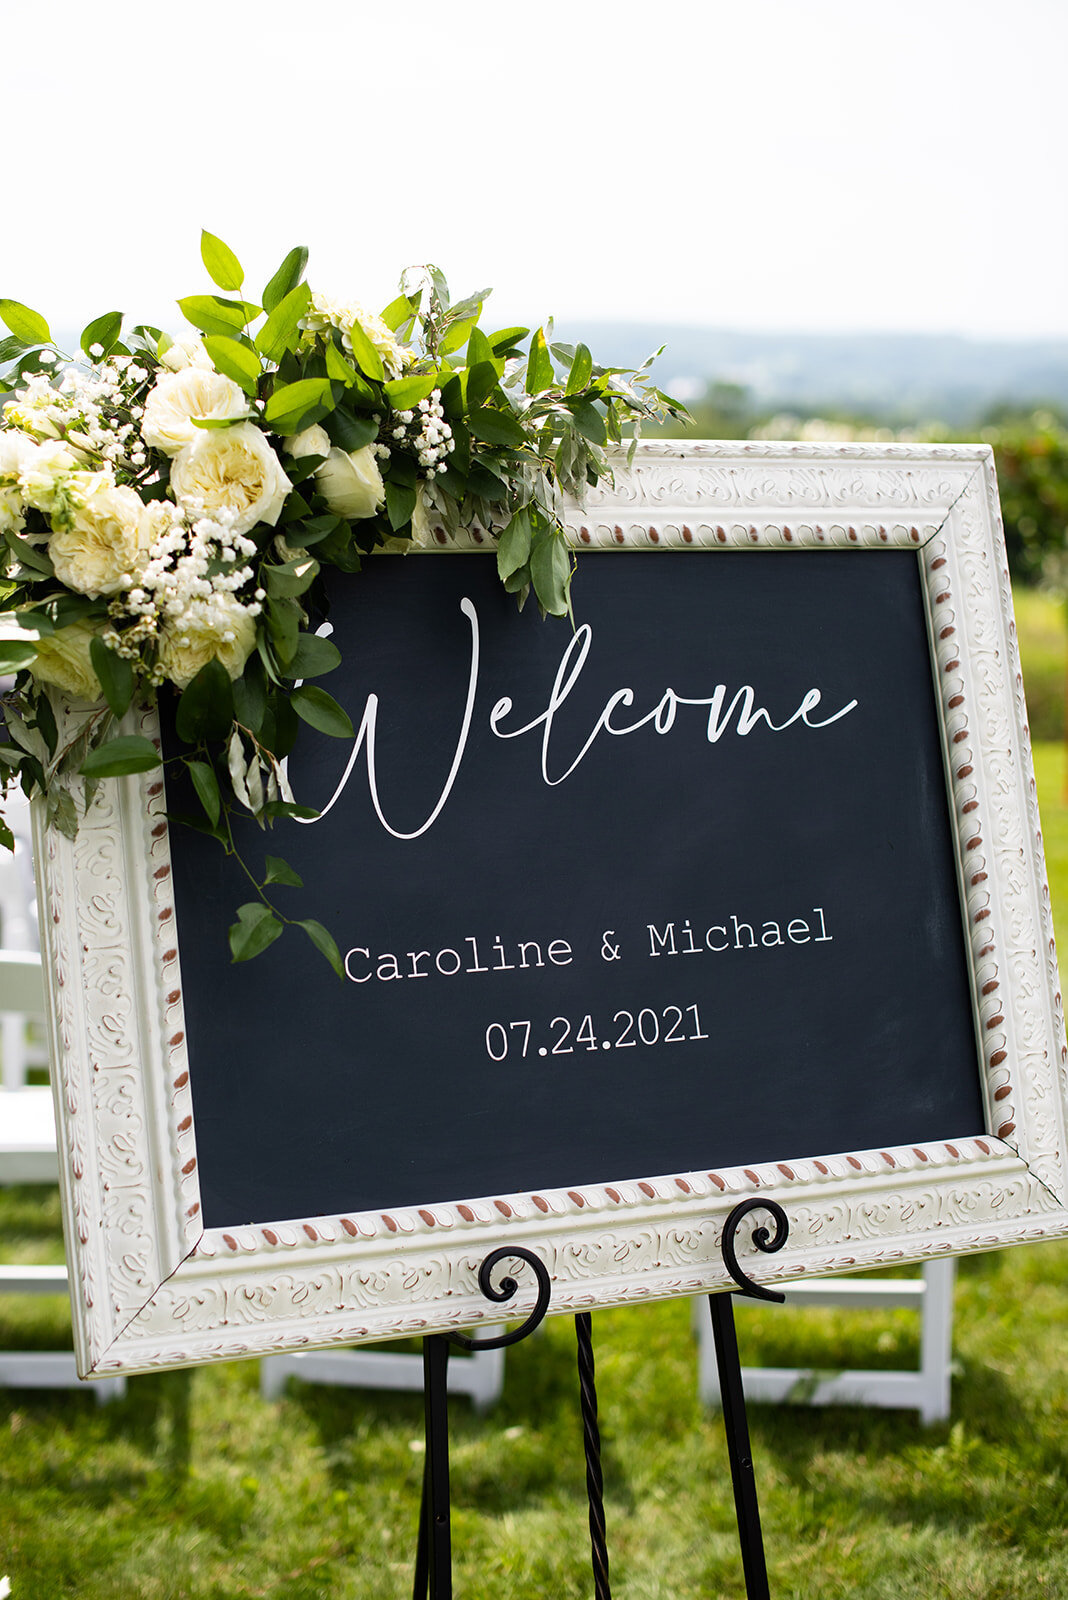 events-by-carianne-event-planner-wedding-planner-outdoor-wedding-mountain-top-wedding-wedding-destination-wedding-red-barn-20-upstate-new-york-rochester-syracuse-wedding-planner-kerri-lynne-photography 28